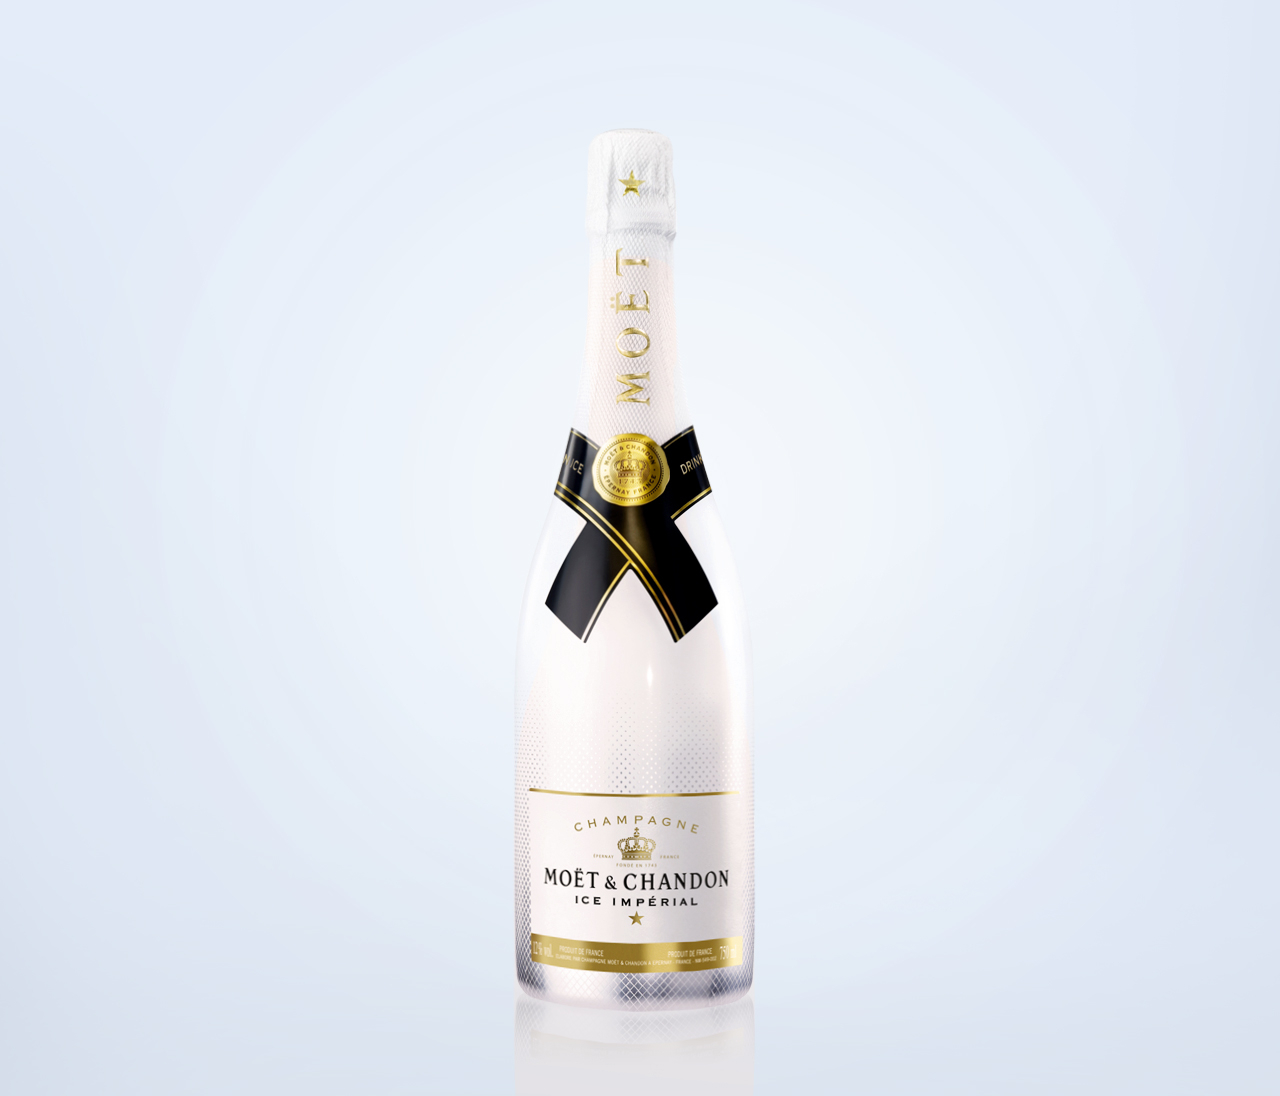 Moet & Chandon Ice Imperial review